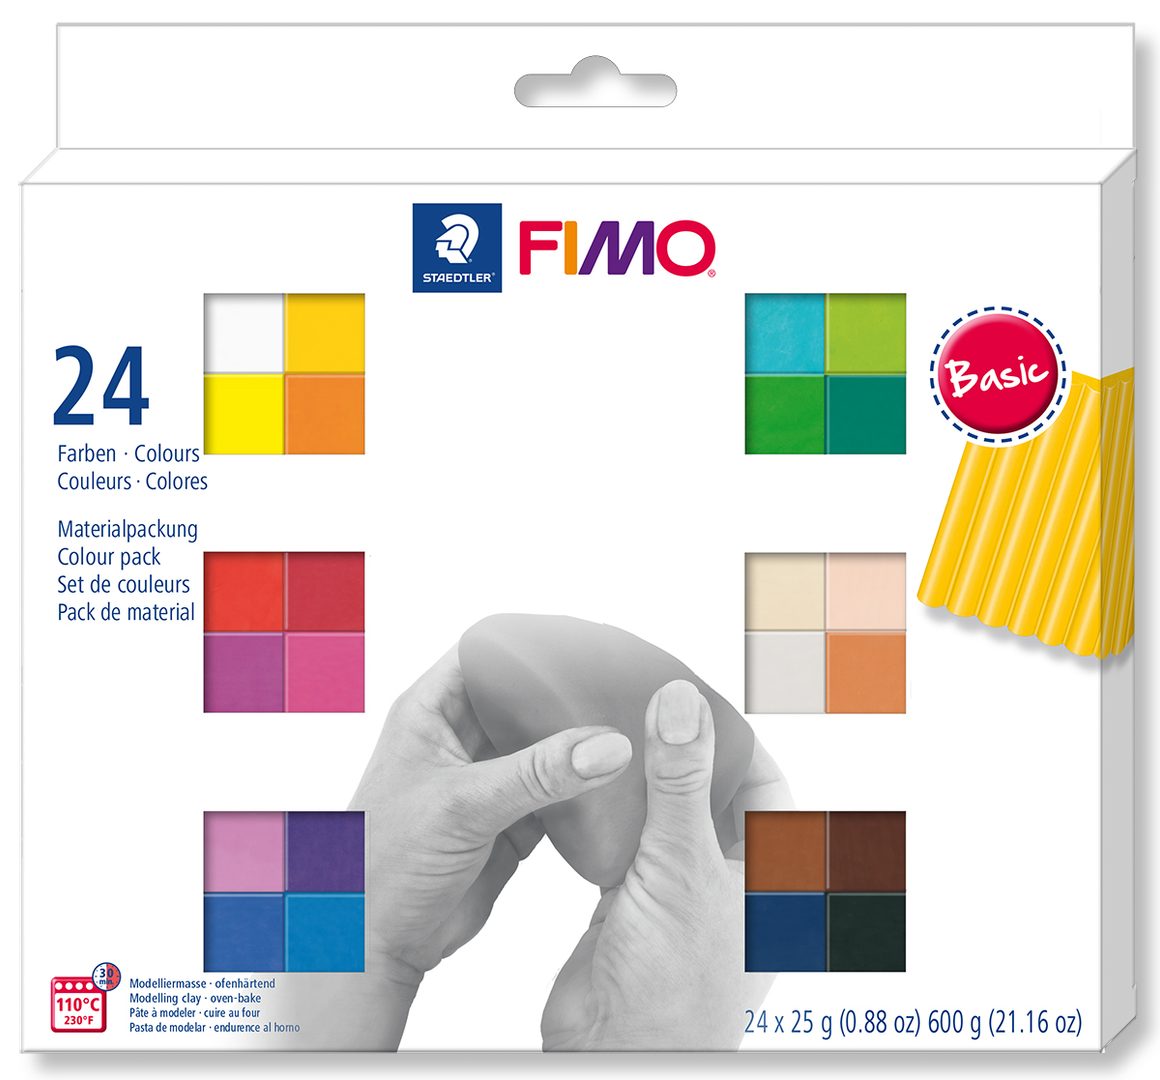 Staedtler FIMO Professional Polymer Clay - Artist Oven Bake Clay for  Jewelry, Sculpting, Modelling, White, 1 Lb Block, 8041-0